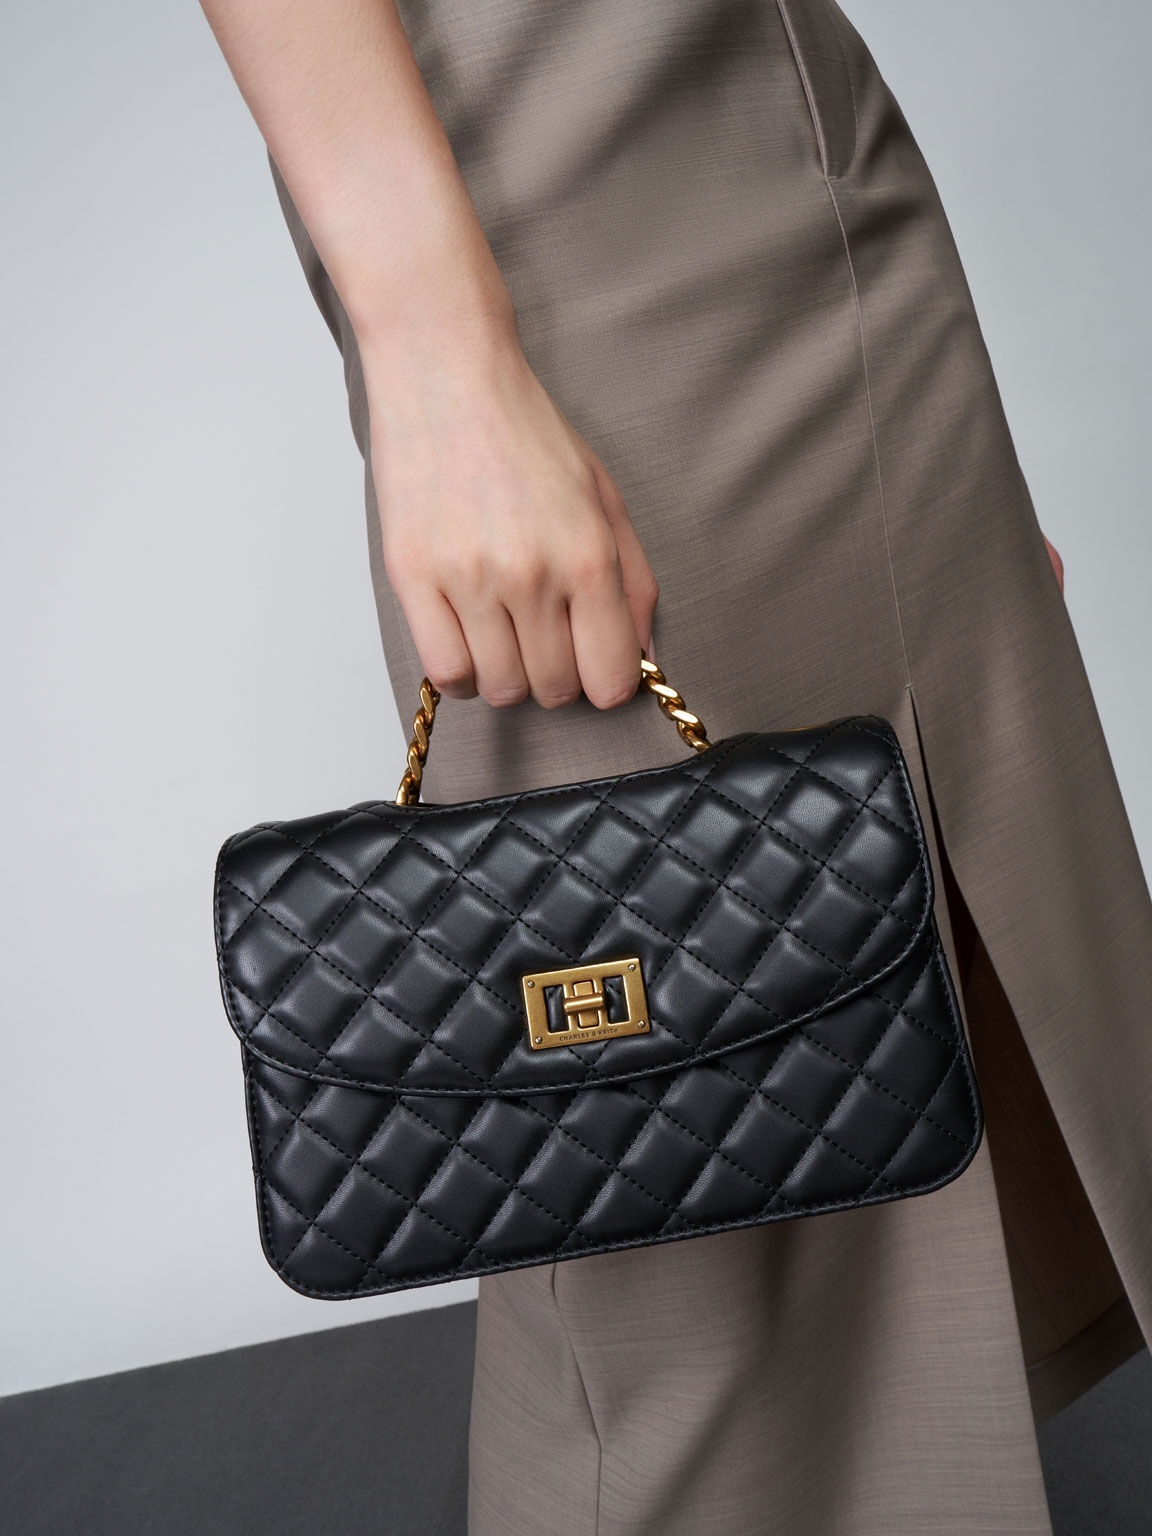 TÚI CHARLES KEITH QUILTED CLUTCH BAG CK2-70701136 15